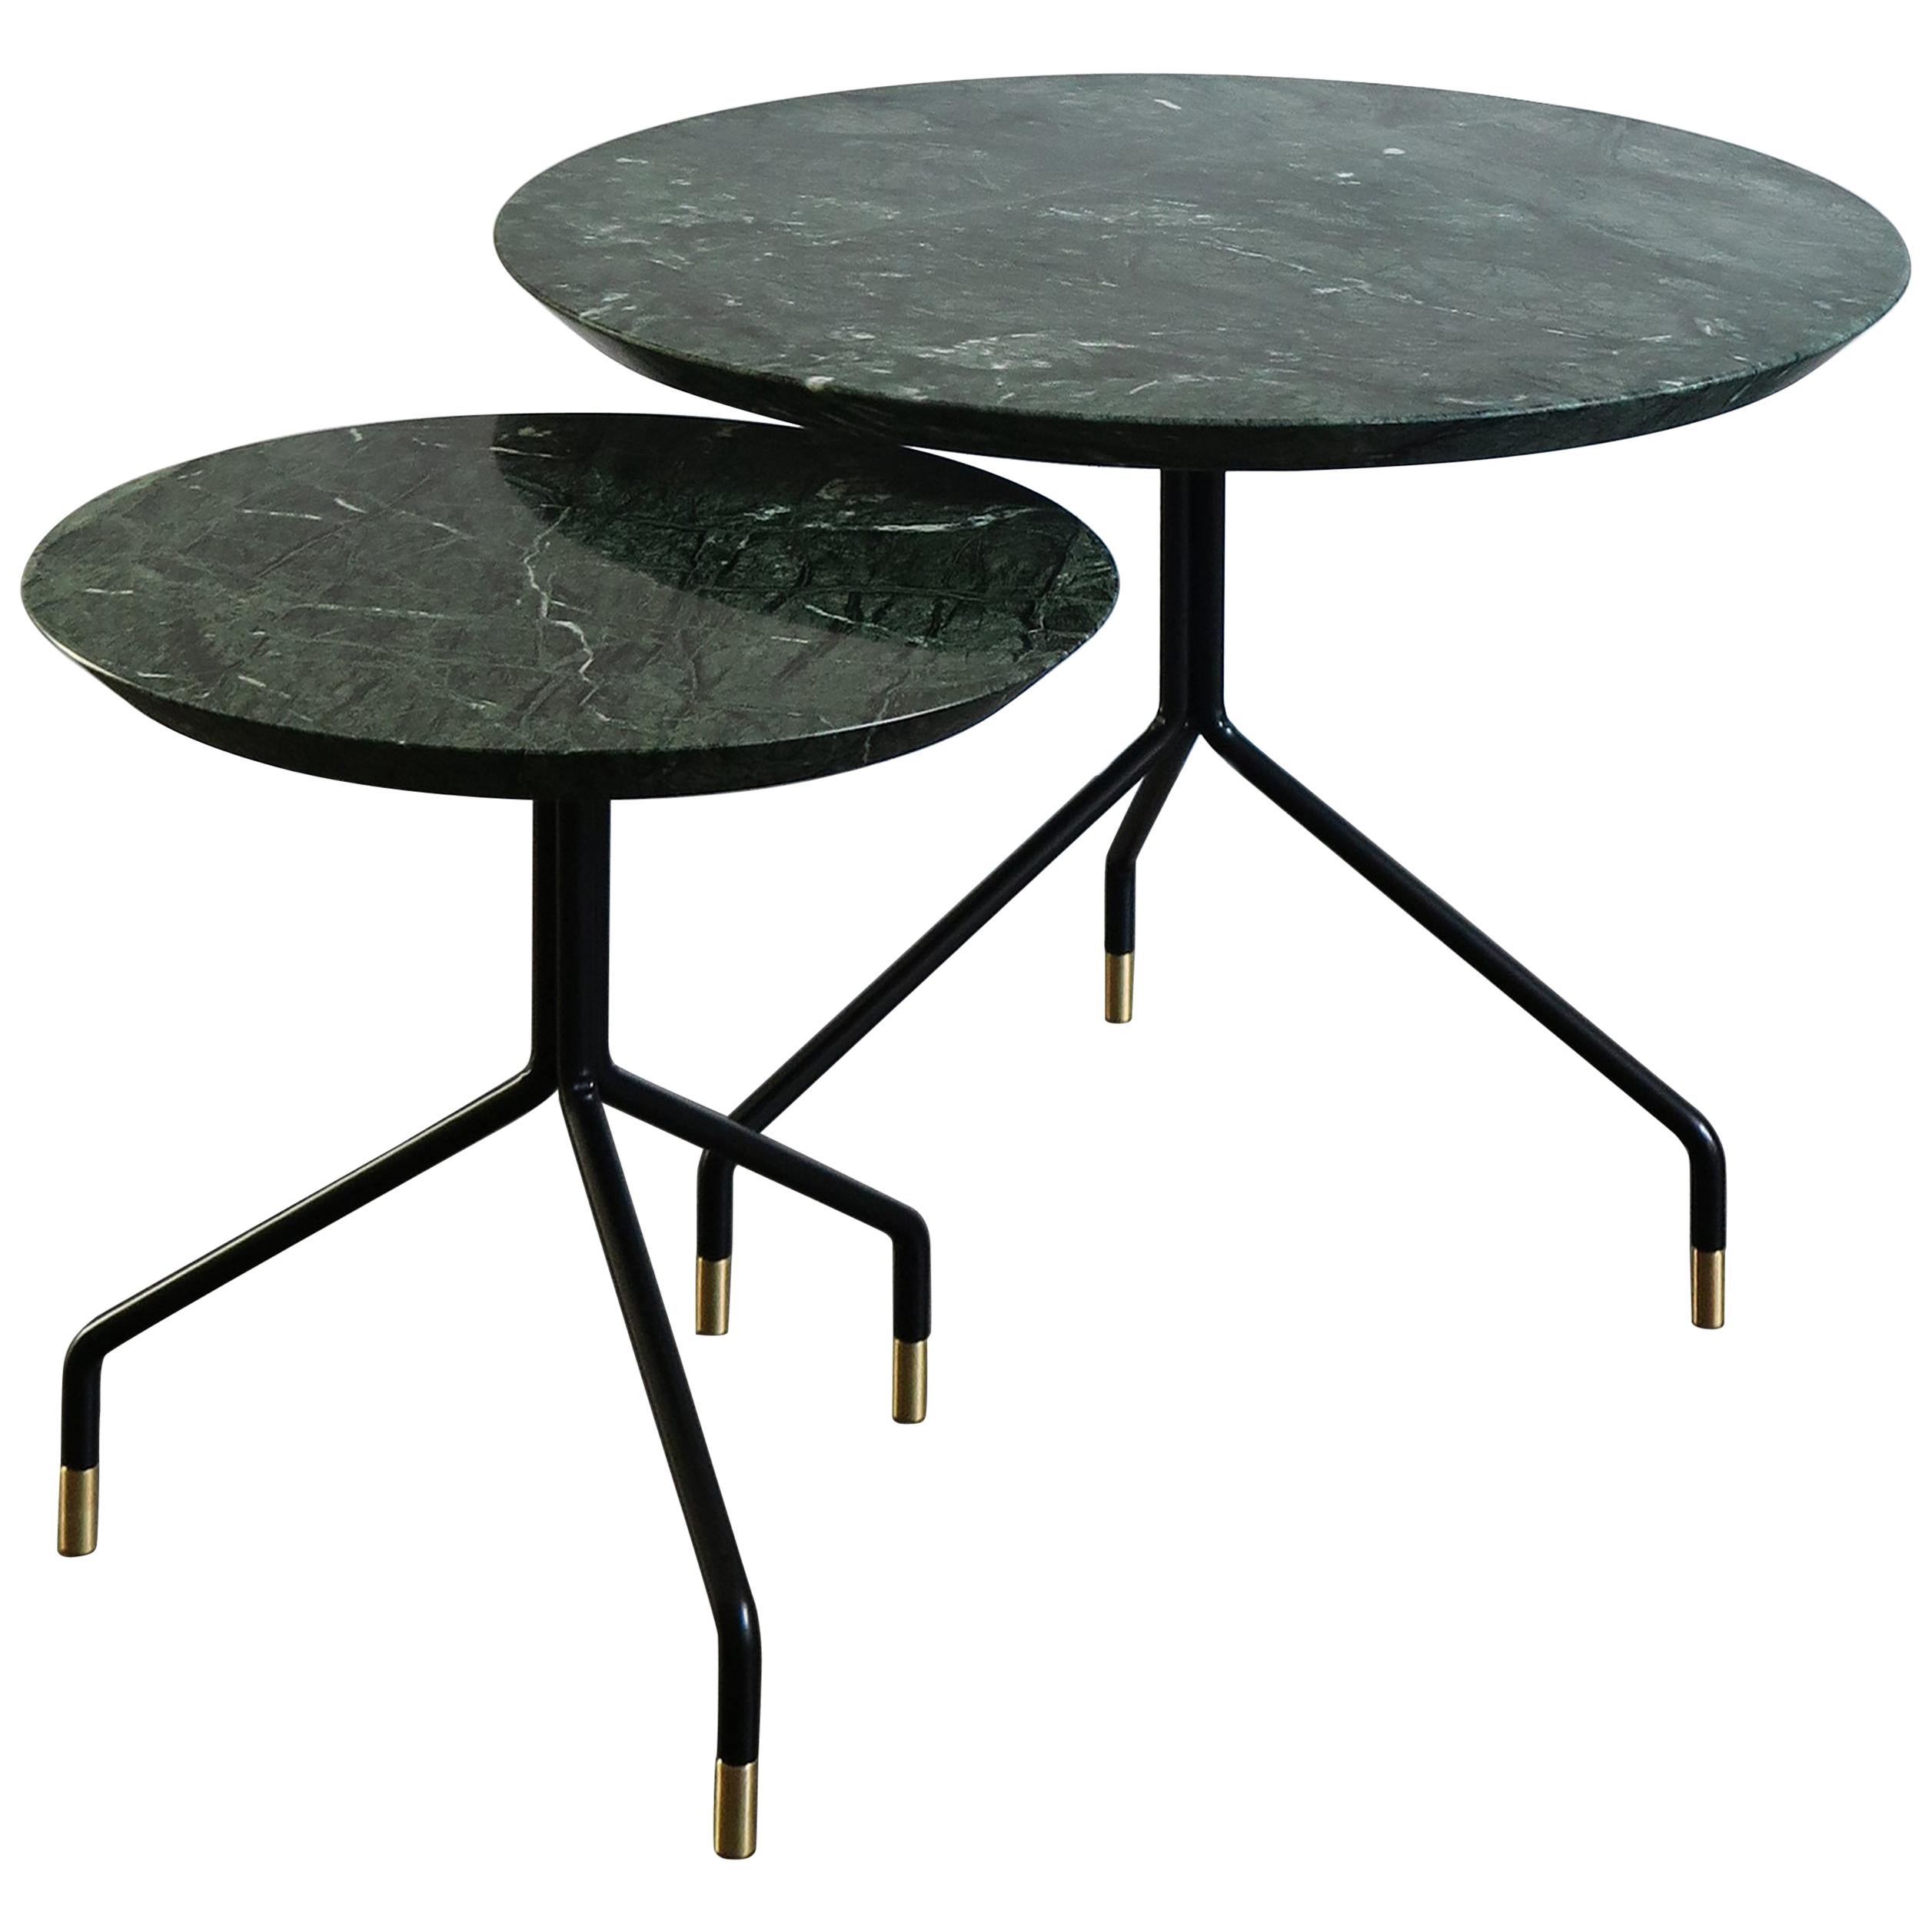 Italian Contemporary Marble Coffee Tables Set New Desig Capperidicasa For Sale